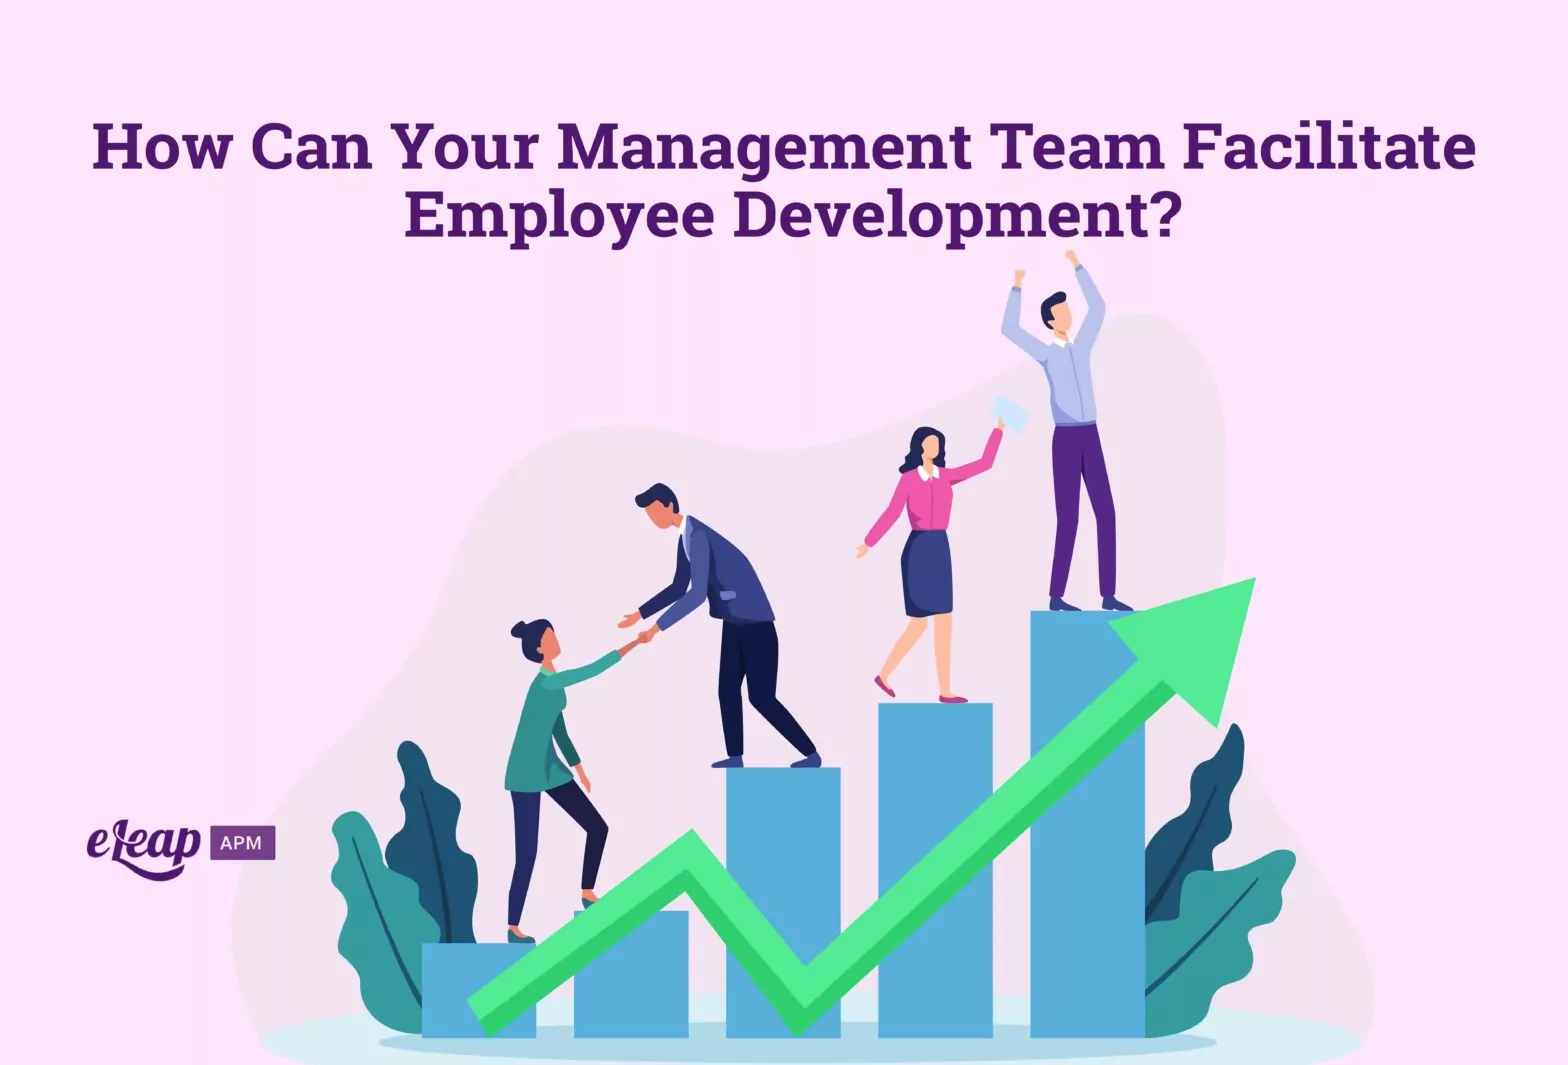 How Can Your Management Team Facilitate Employee Development?